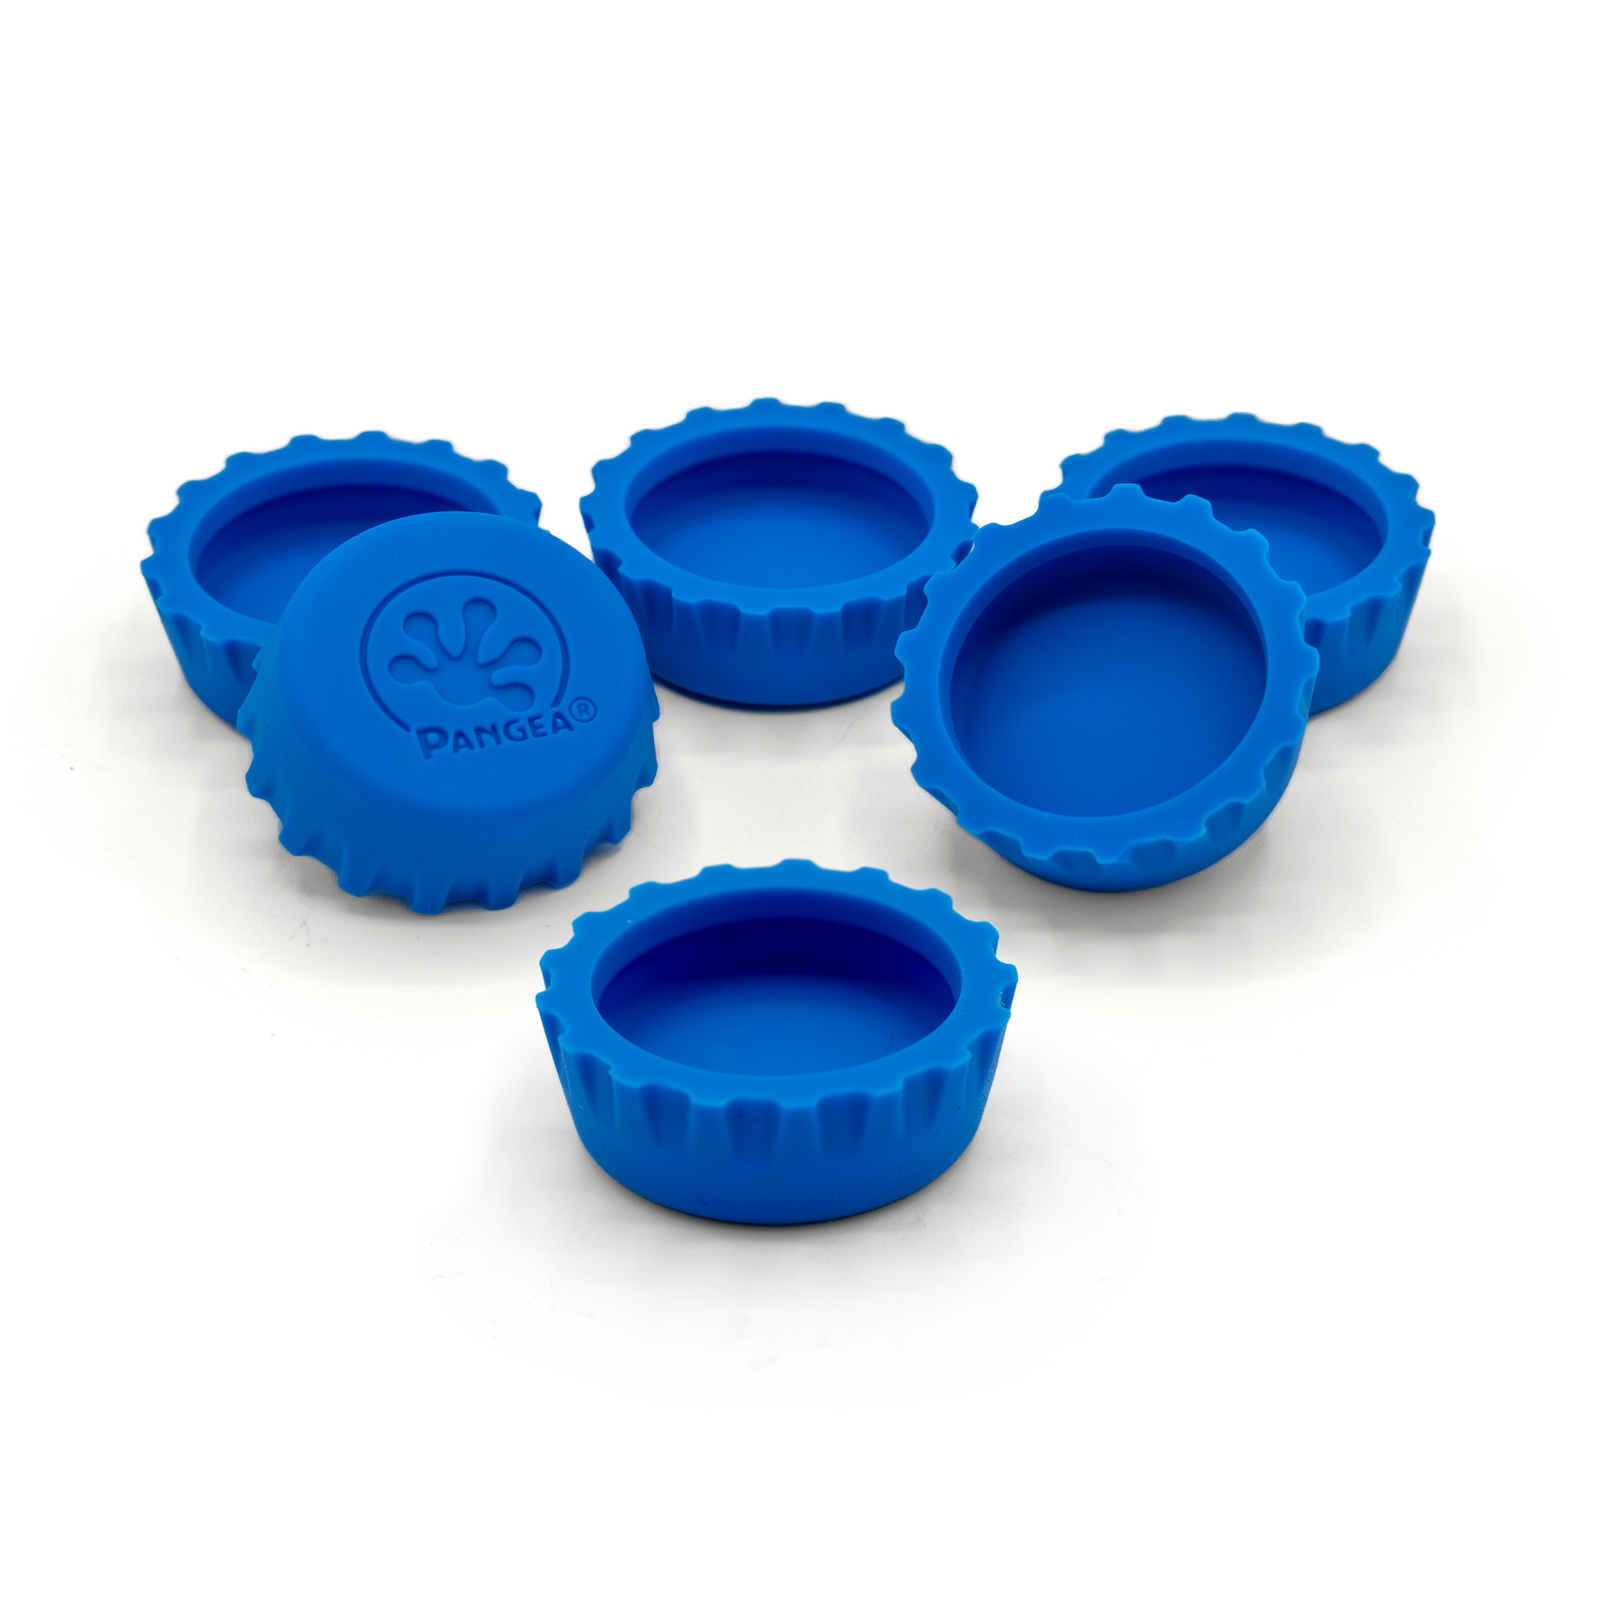 https://cdn.shopify.com/s/files/1/0089/8567/3828/products/6-PackSiliconeBottleCap-Blue_1600x.png?v=1666198416